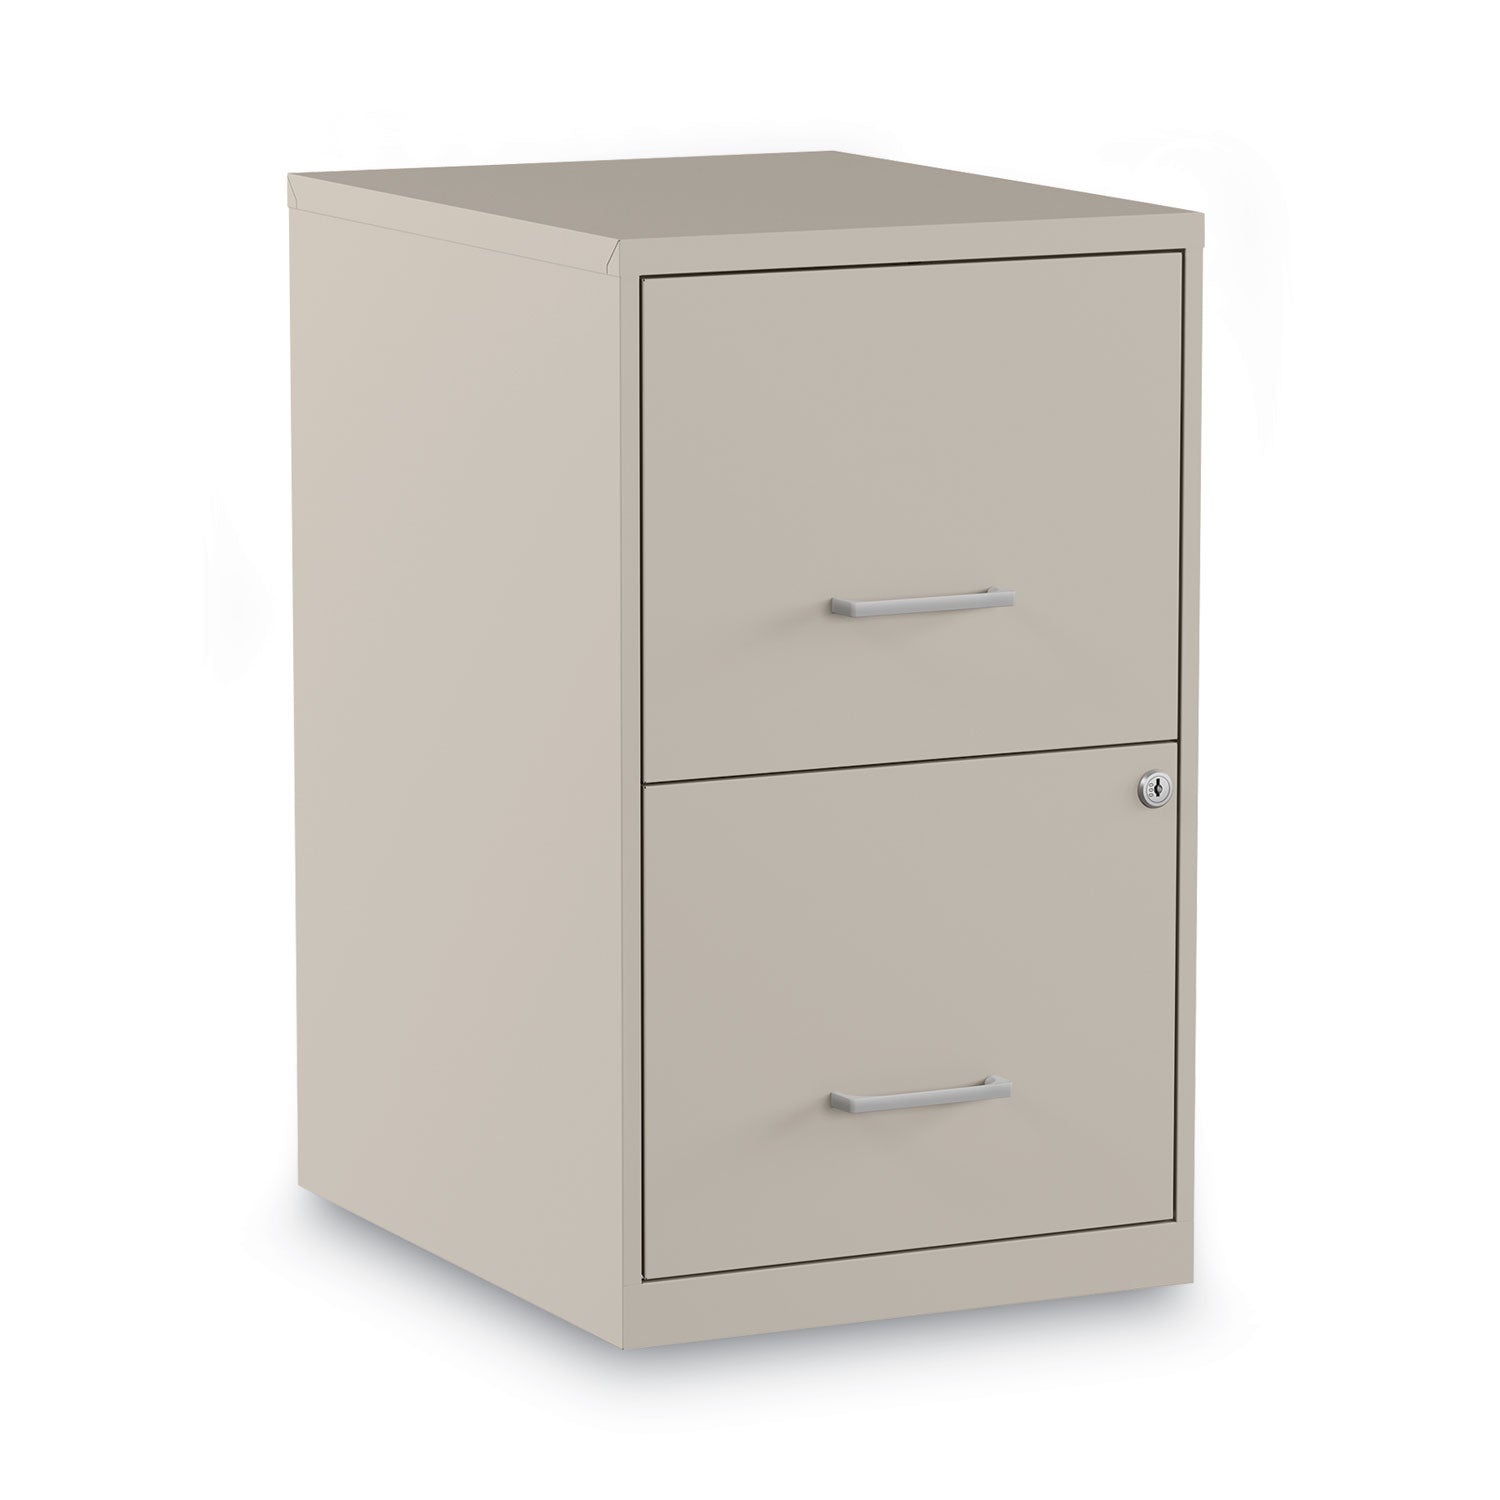 soho-vertical-file-cabinet-2-drawers-file-file-letter-putty-14-x-18-x-241_alesvf1824py - 1